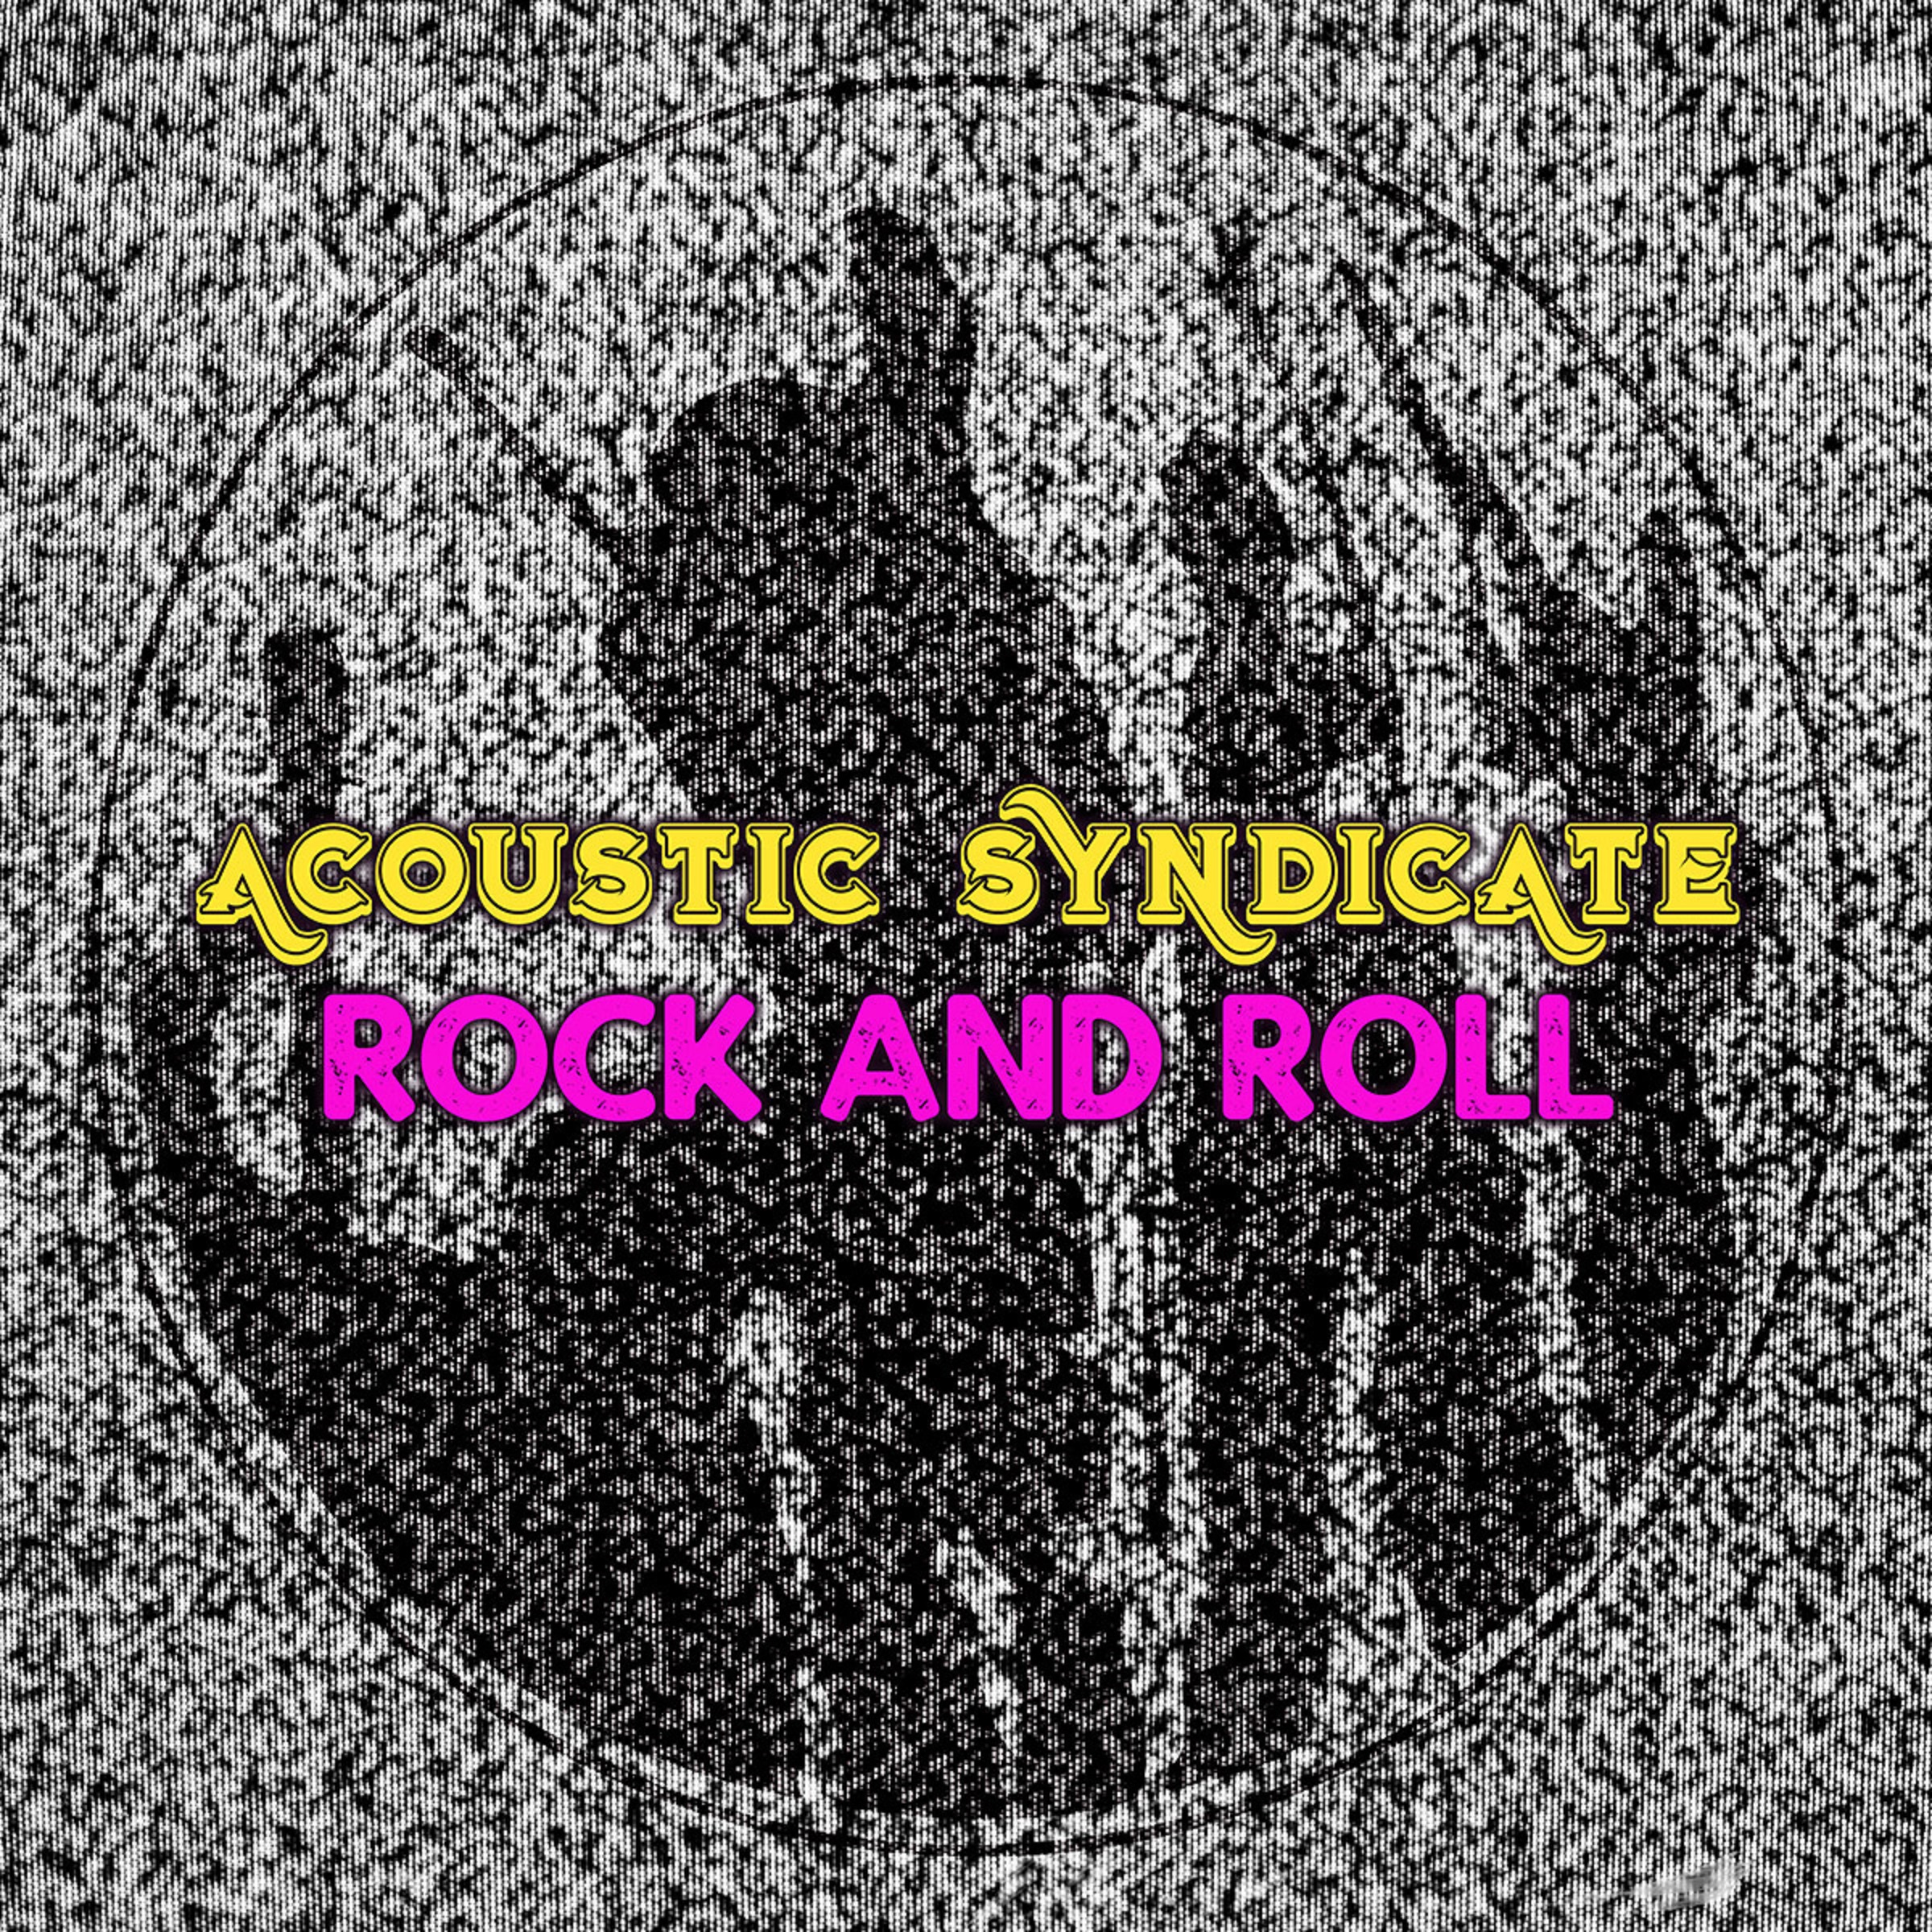 Acoustic Syndicate remembers “Rock and Roll”